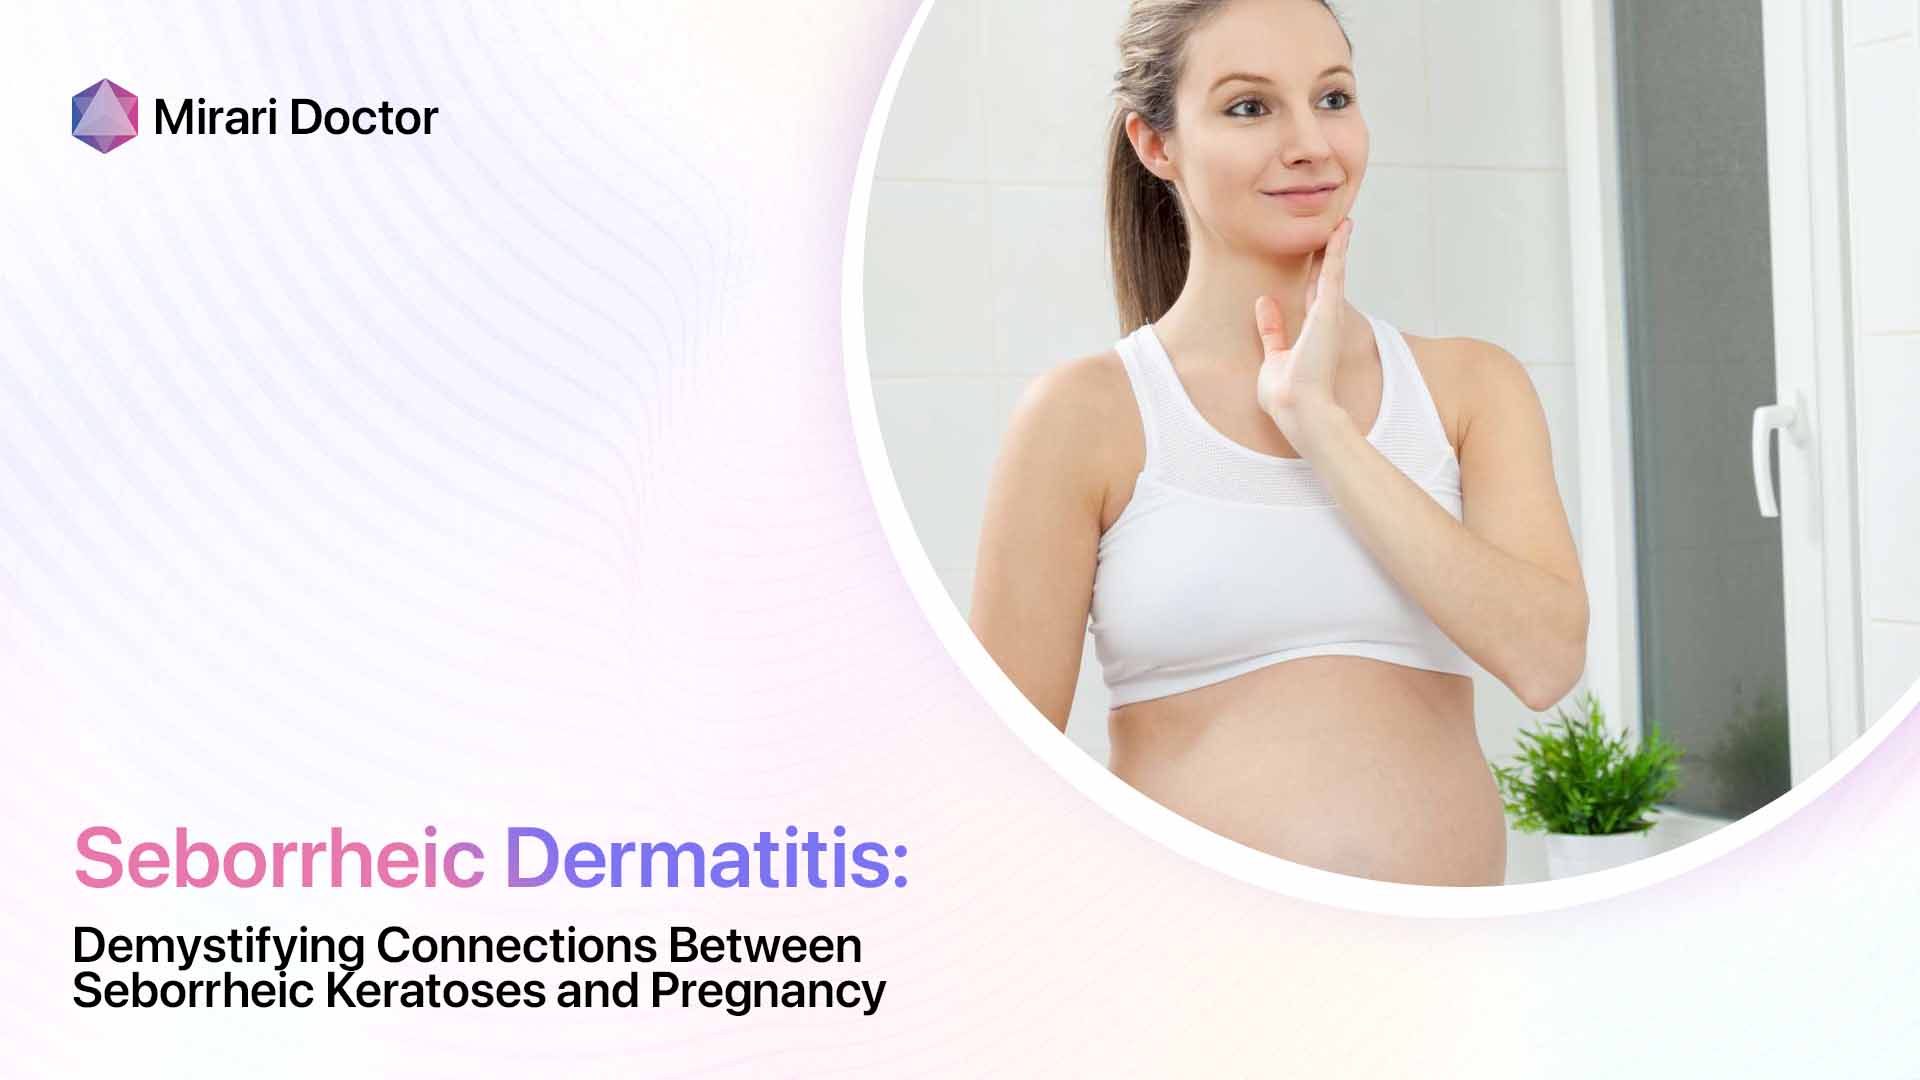 Featured image for “Demystifying Connections Between Seborrheic Keratoses and Pregnancy”